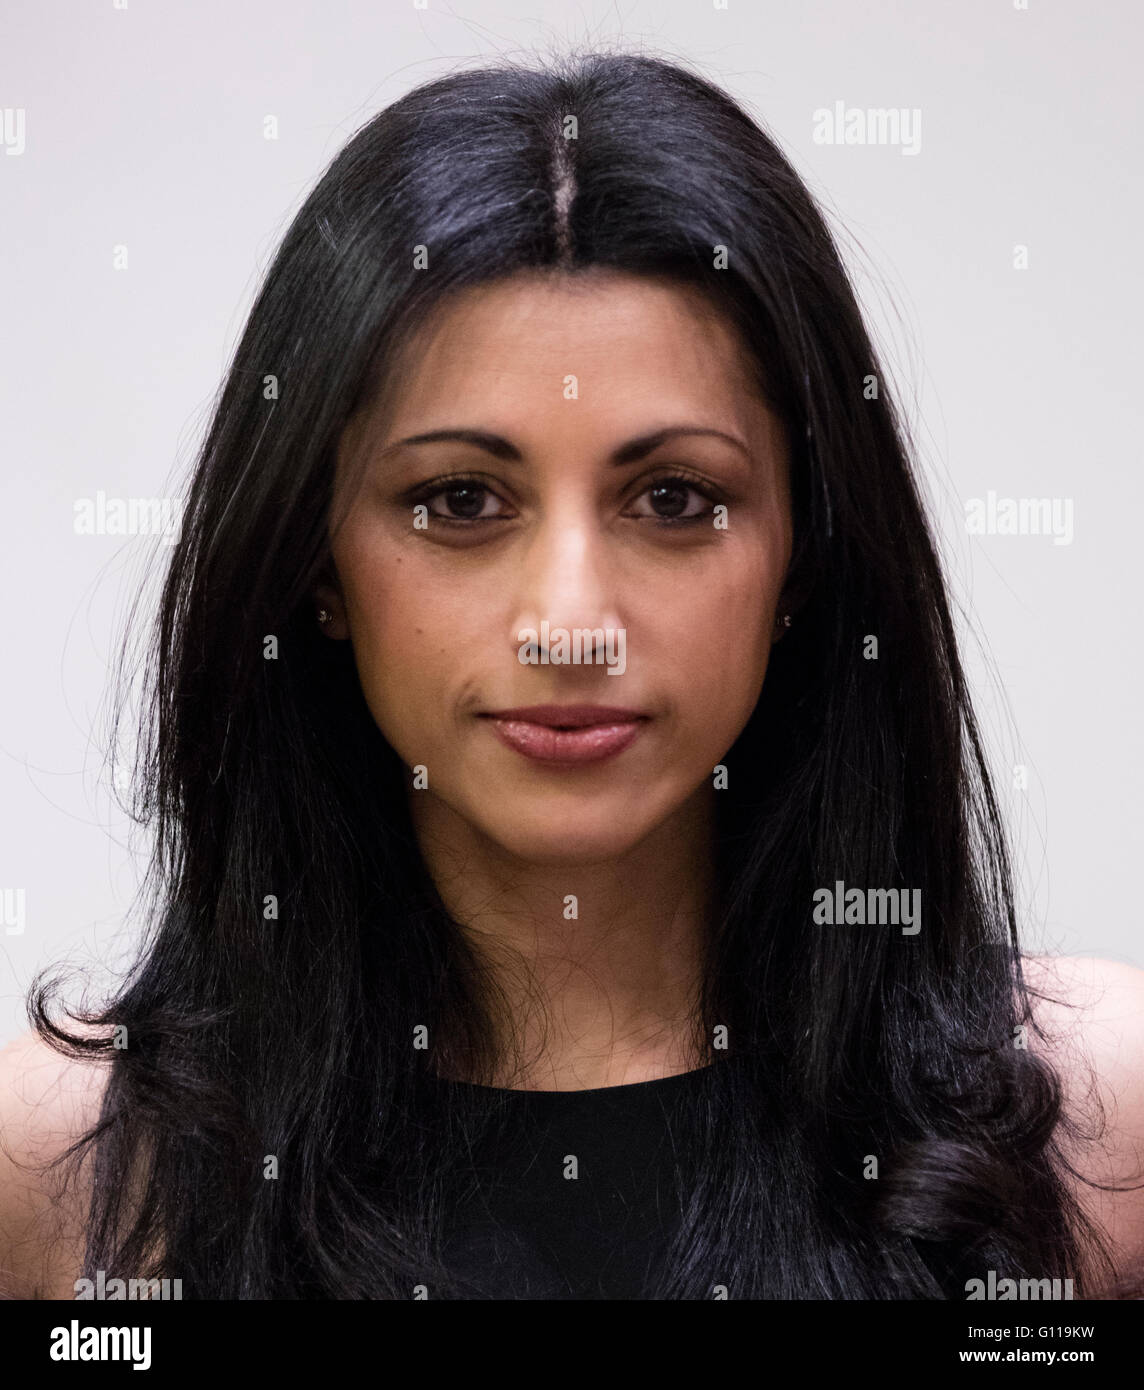 New York City, United States. 03rd May, 2016. British-American television and film actress Reshma Shetty participated on a special event entitled “Voices of Victims of Human Trafficking: Readings from River of Flesh and Other Stories”. The event was organized by the United Nations Office on Drugs and Crime (UNODC) in partnership with the non-governmental organization Apne Aap Women Worldwide today at the UN Headquarters in New York. © Luiz Rampelotto/PacificPress/Alamy Live News Stock Photo